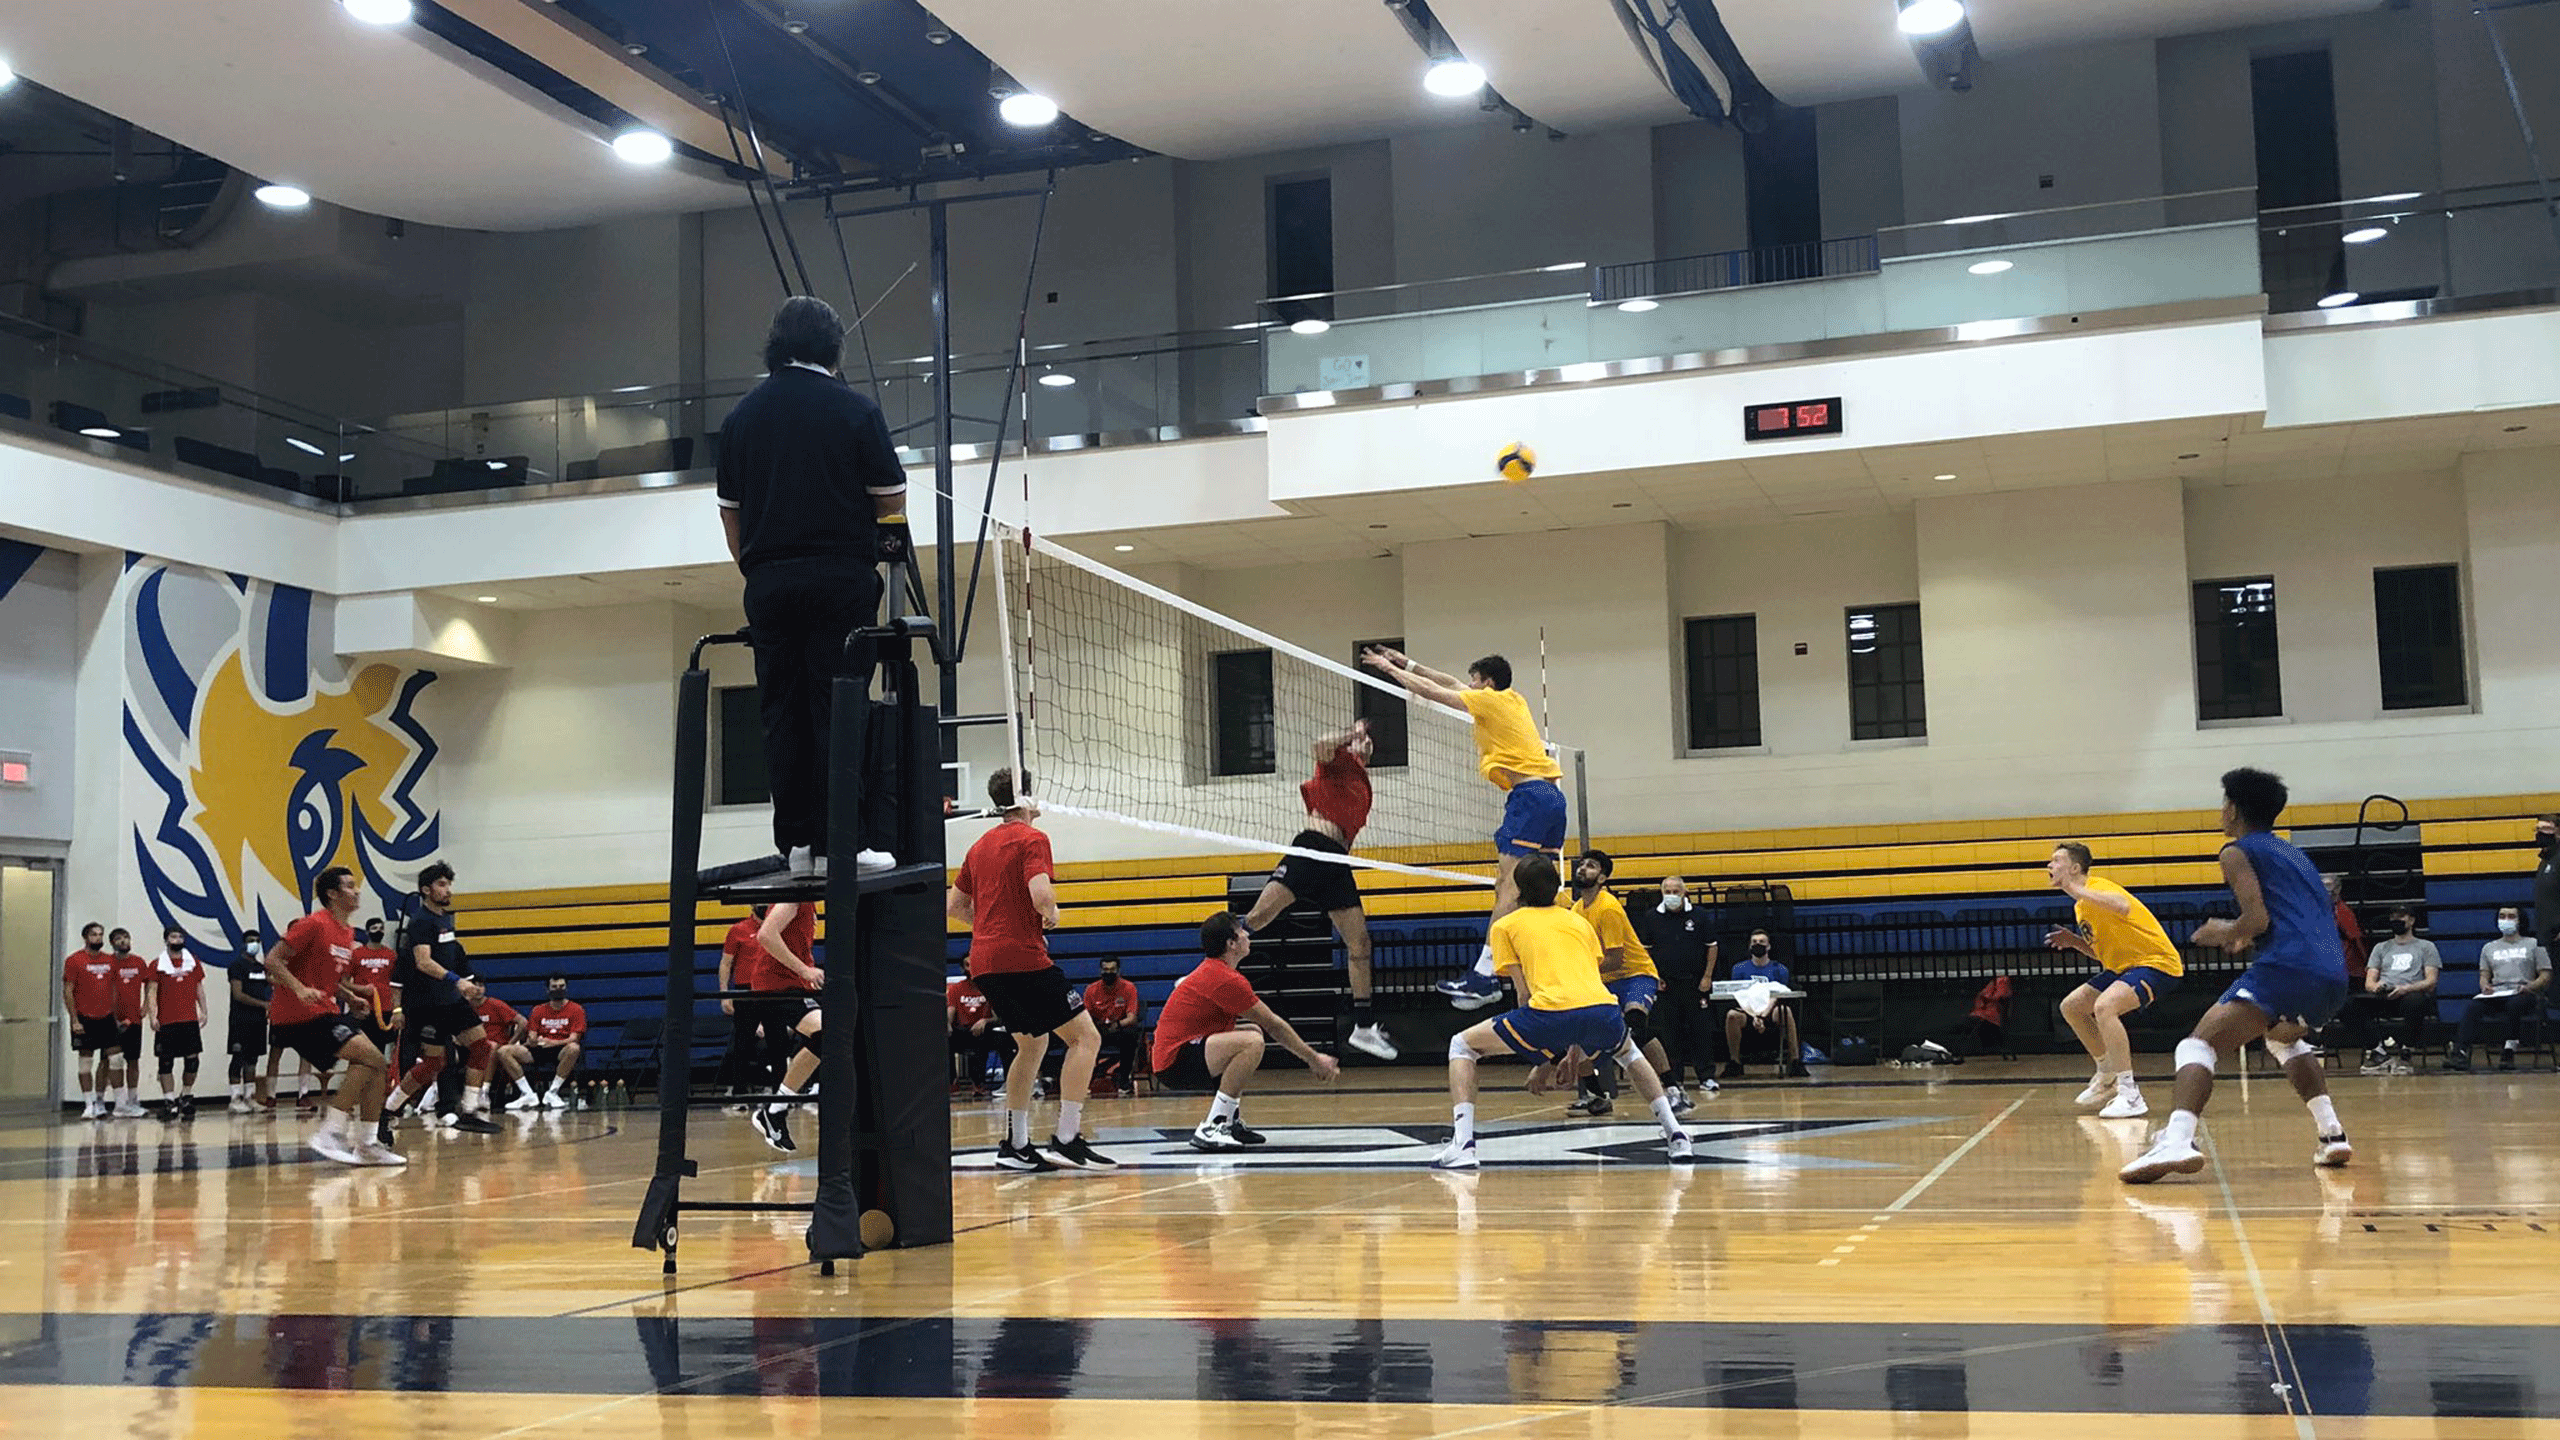 A Rams men's volleyball player in a yellow jersey goes up to the net to play the ball